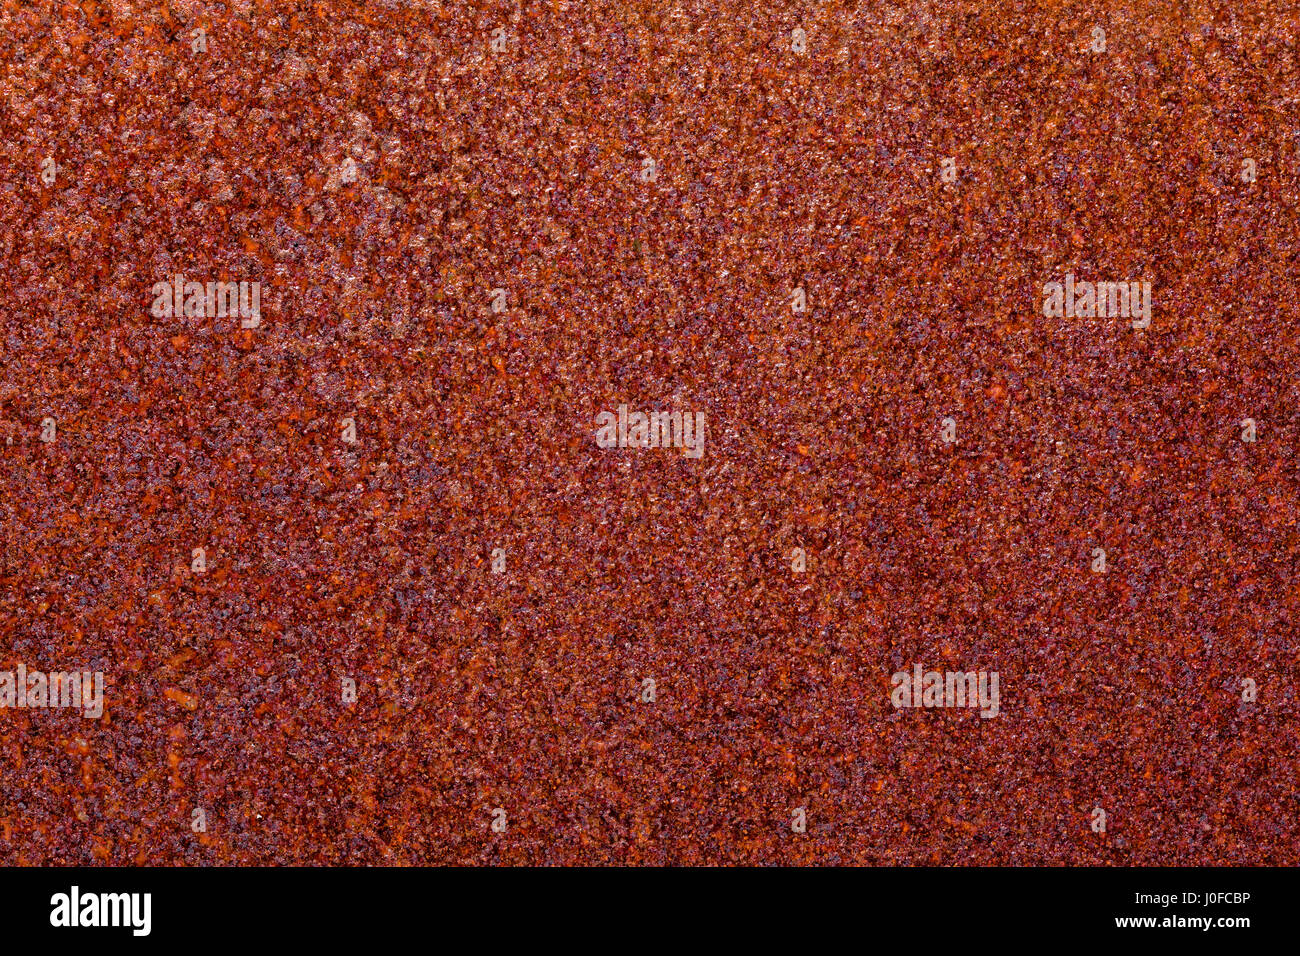 corroded rusted iron metal background Stock Photo